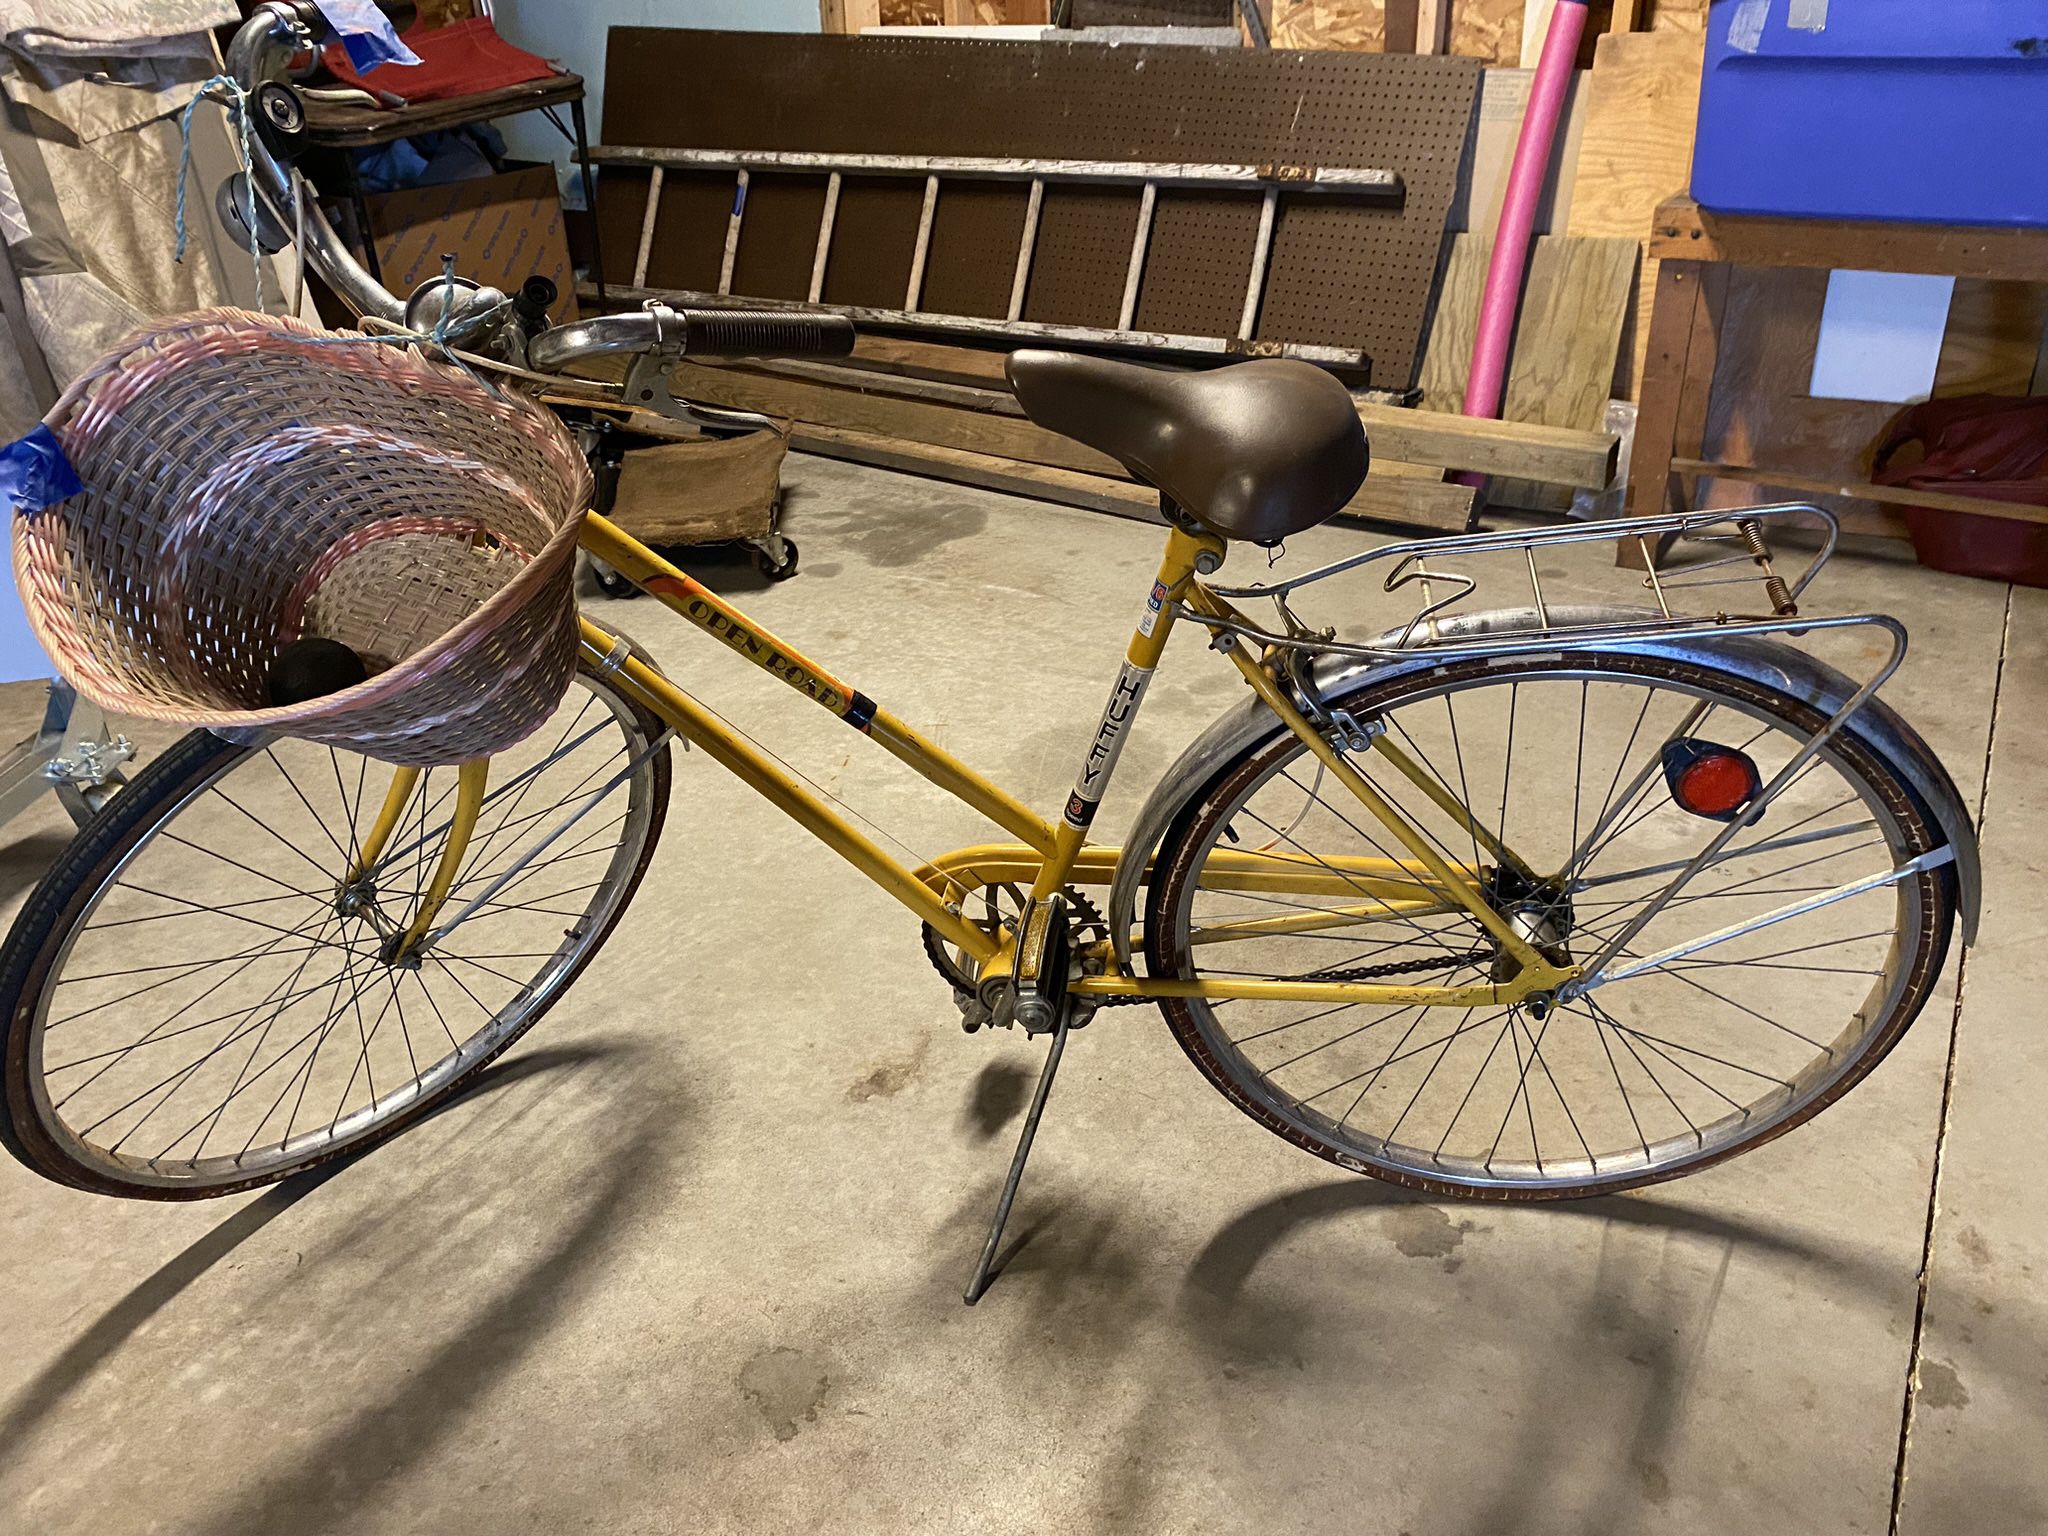 VINTAGE HUFFY OPEN ROAD 3 SPEED BICYCLE 